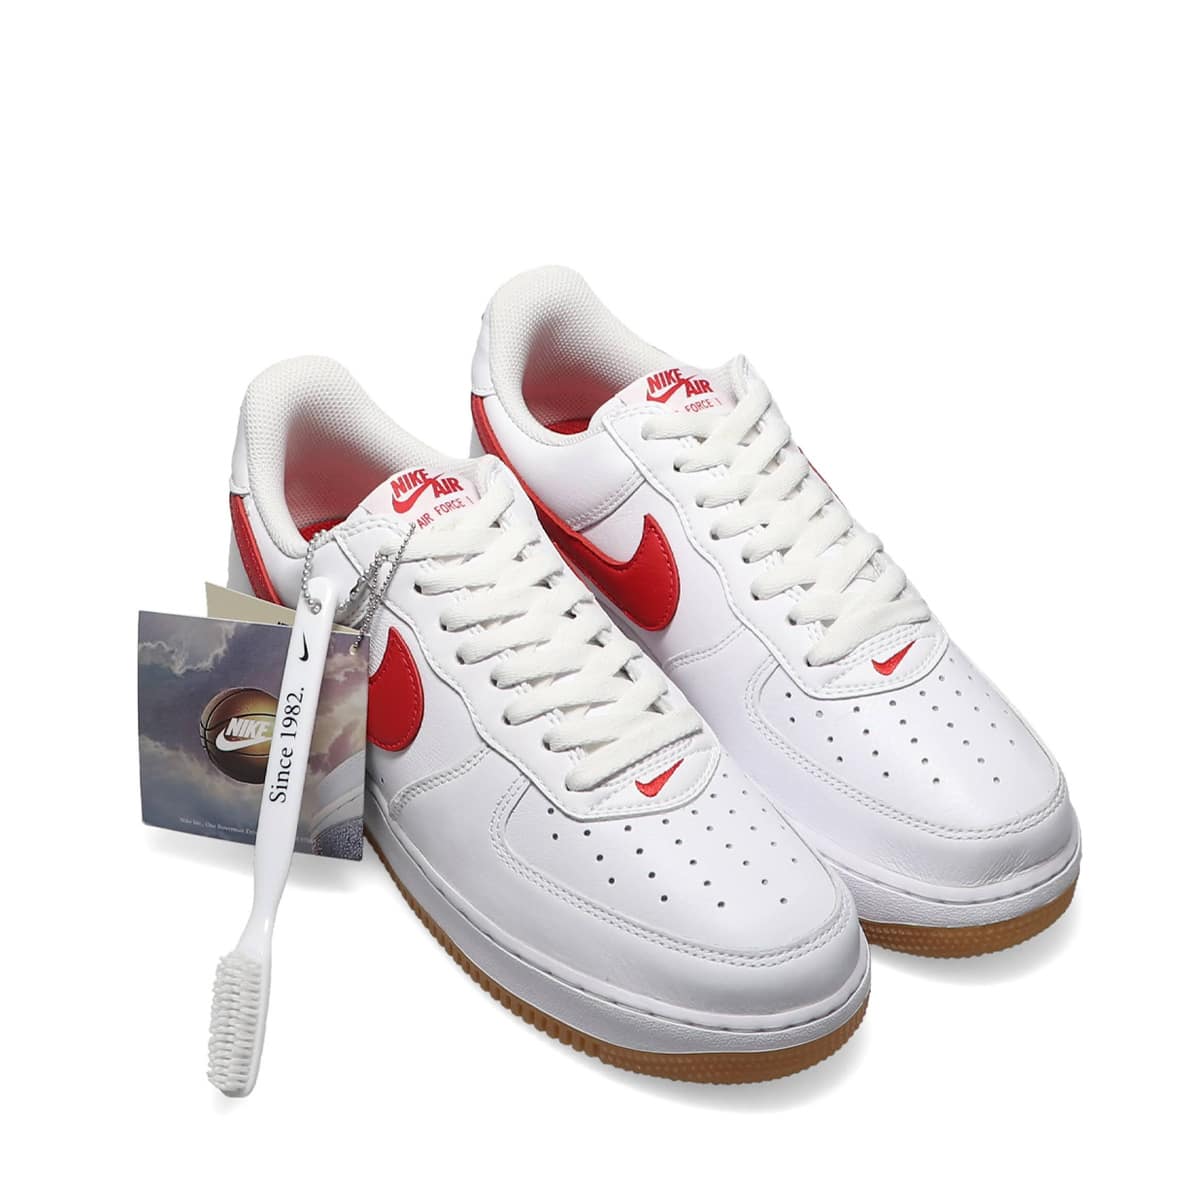 NIKE AIR FORCE 1 LOW RETRO WHITE/UNIVERSITY RED-GUM YELLOW 22SP-I